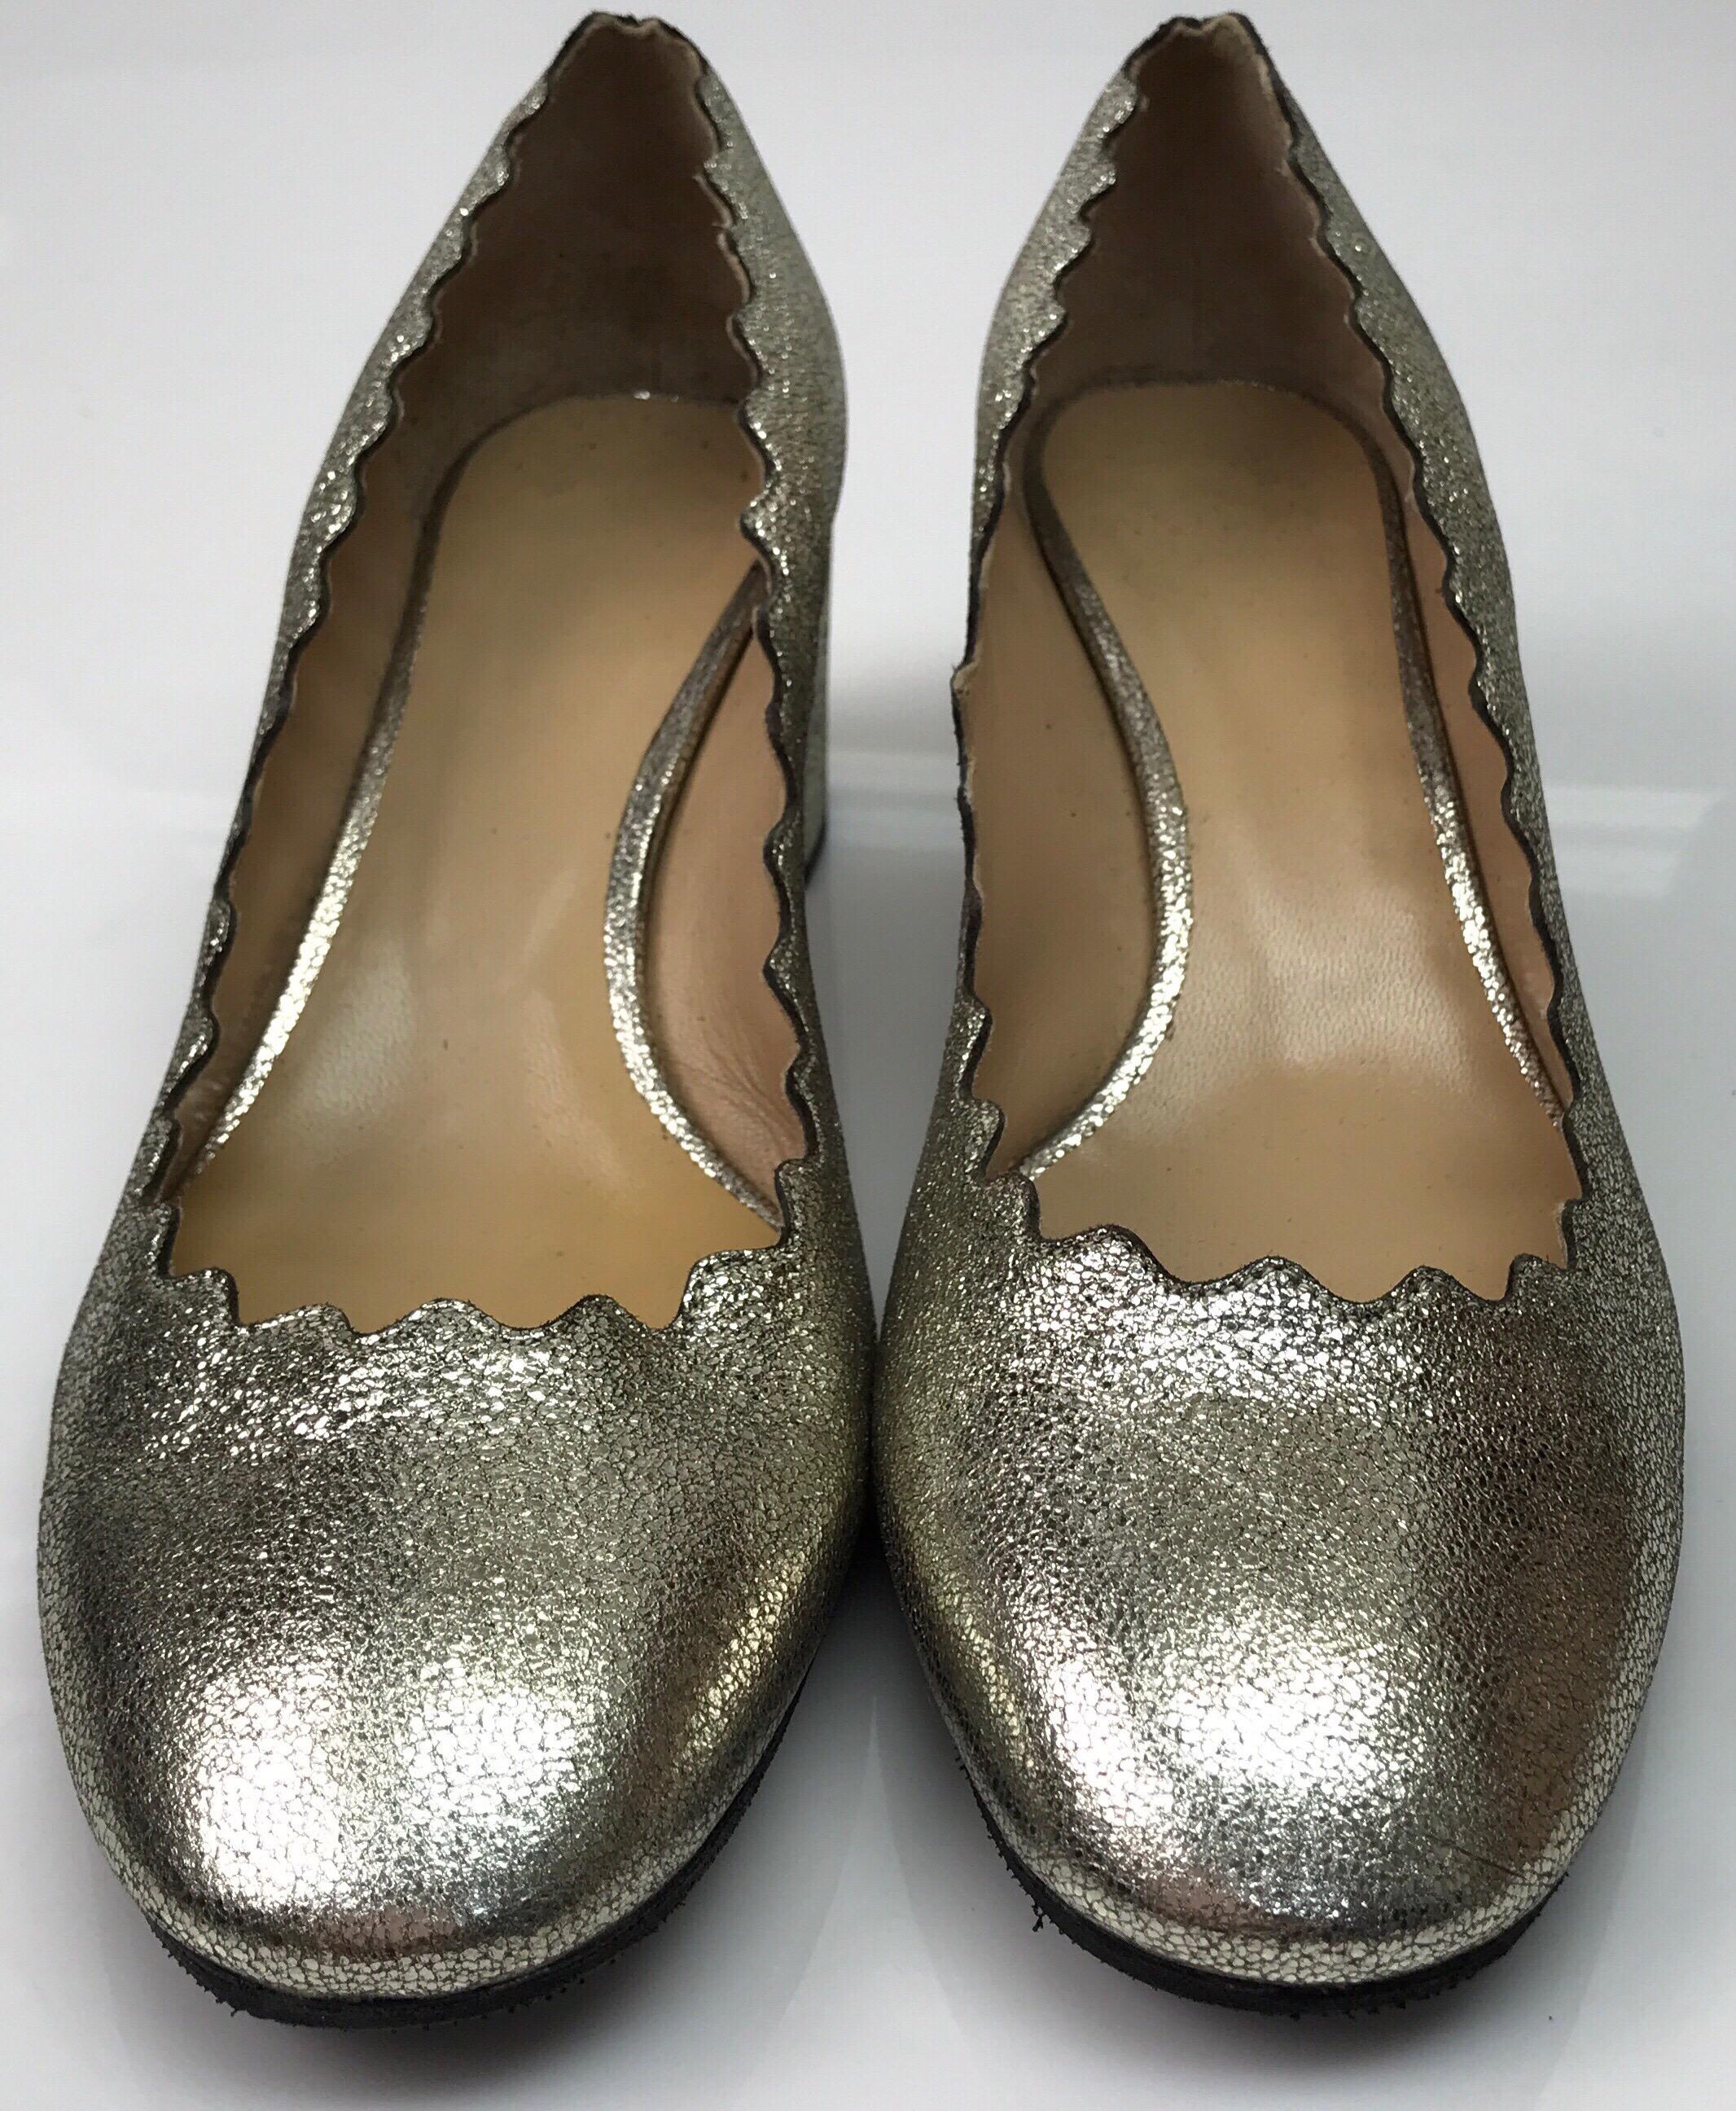 Chloe Gold Block Heel w/ Scalloped Edge- 39. These stunning Chloe heels are in good condition. The inside has some stains on the heel and the bottoms of the shoes have been replaced. The heels are made of a gold metallic leather. It has a block heel